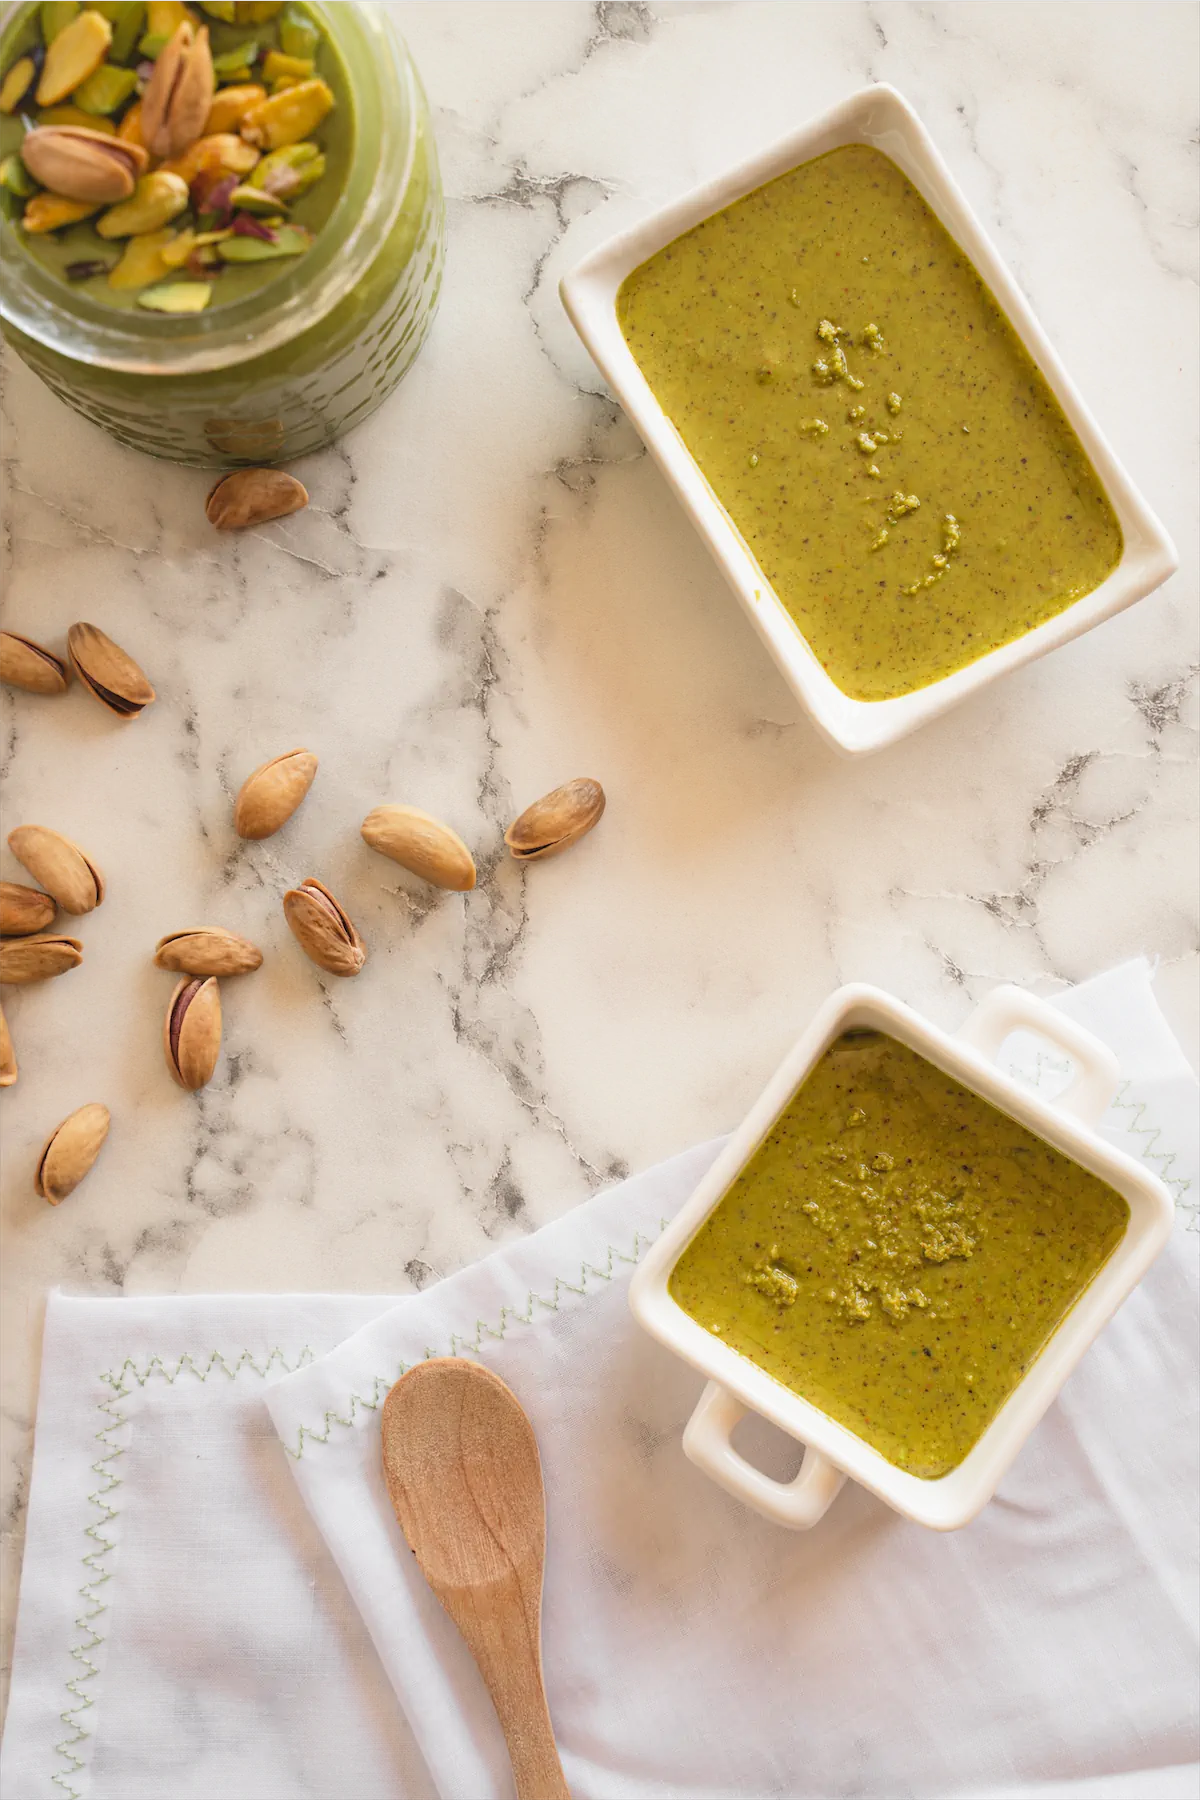 Showcasing sugar-free pistachio butter in three containers, while one is tastefully garnished with pistachio nuts.